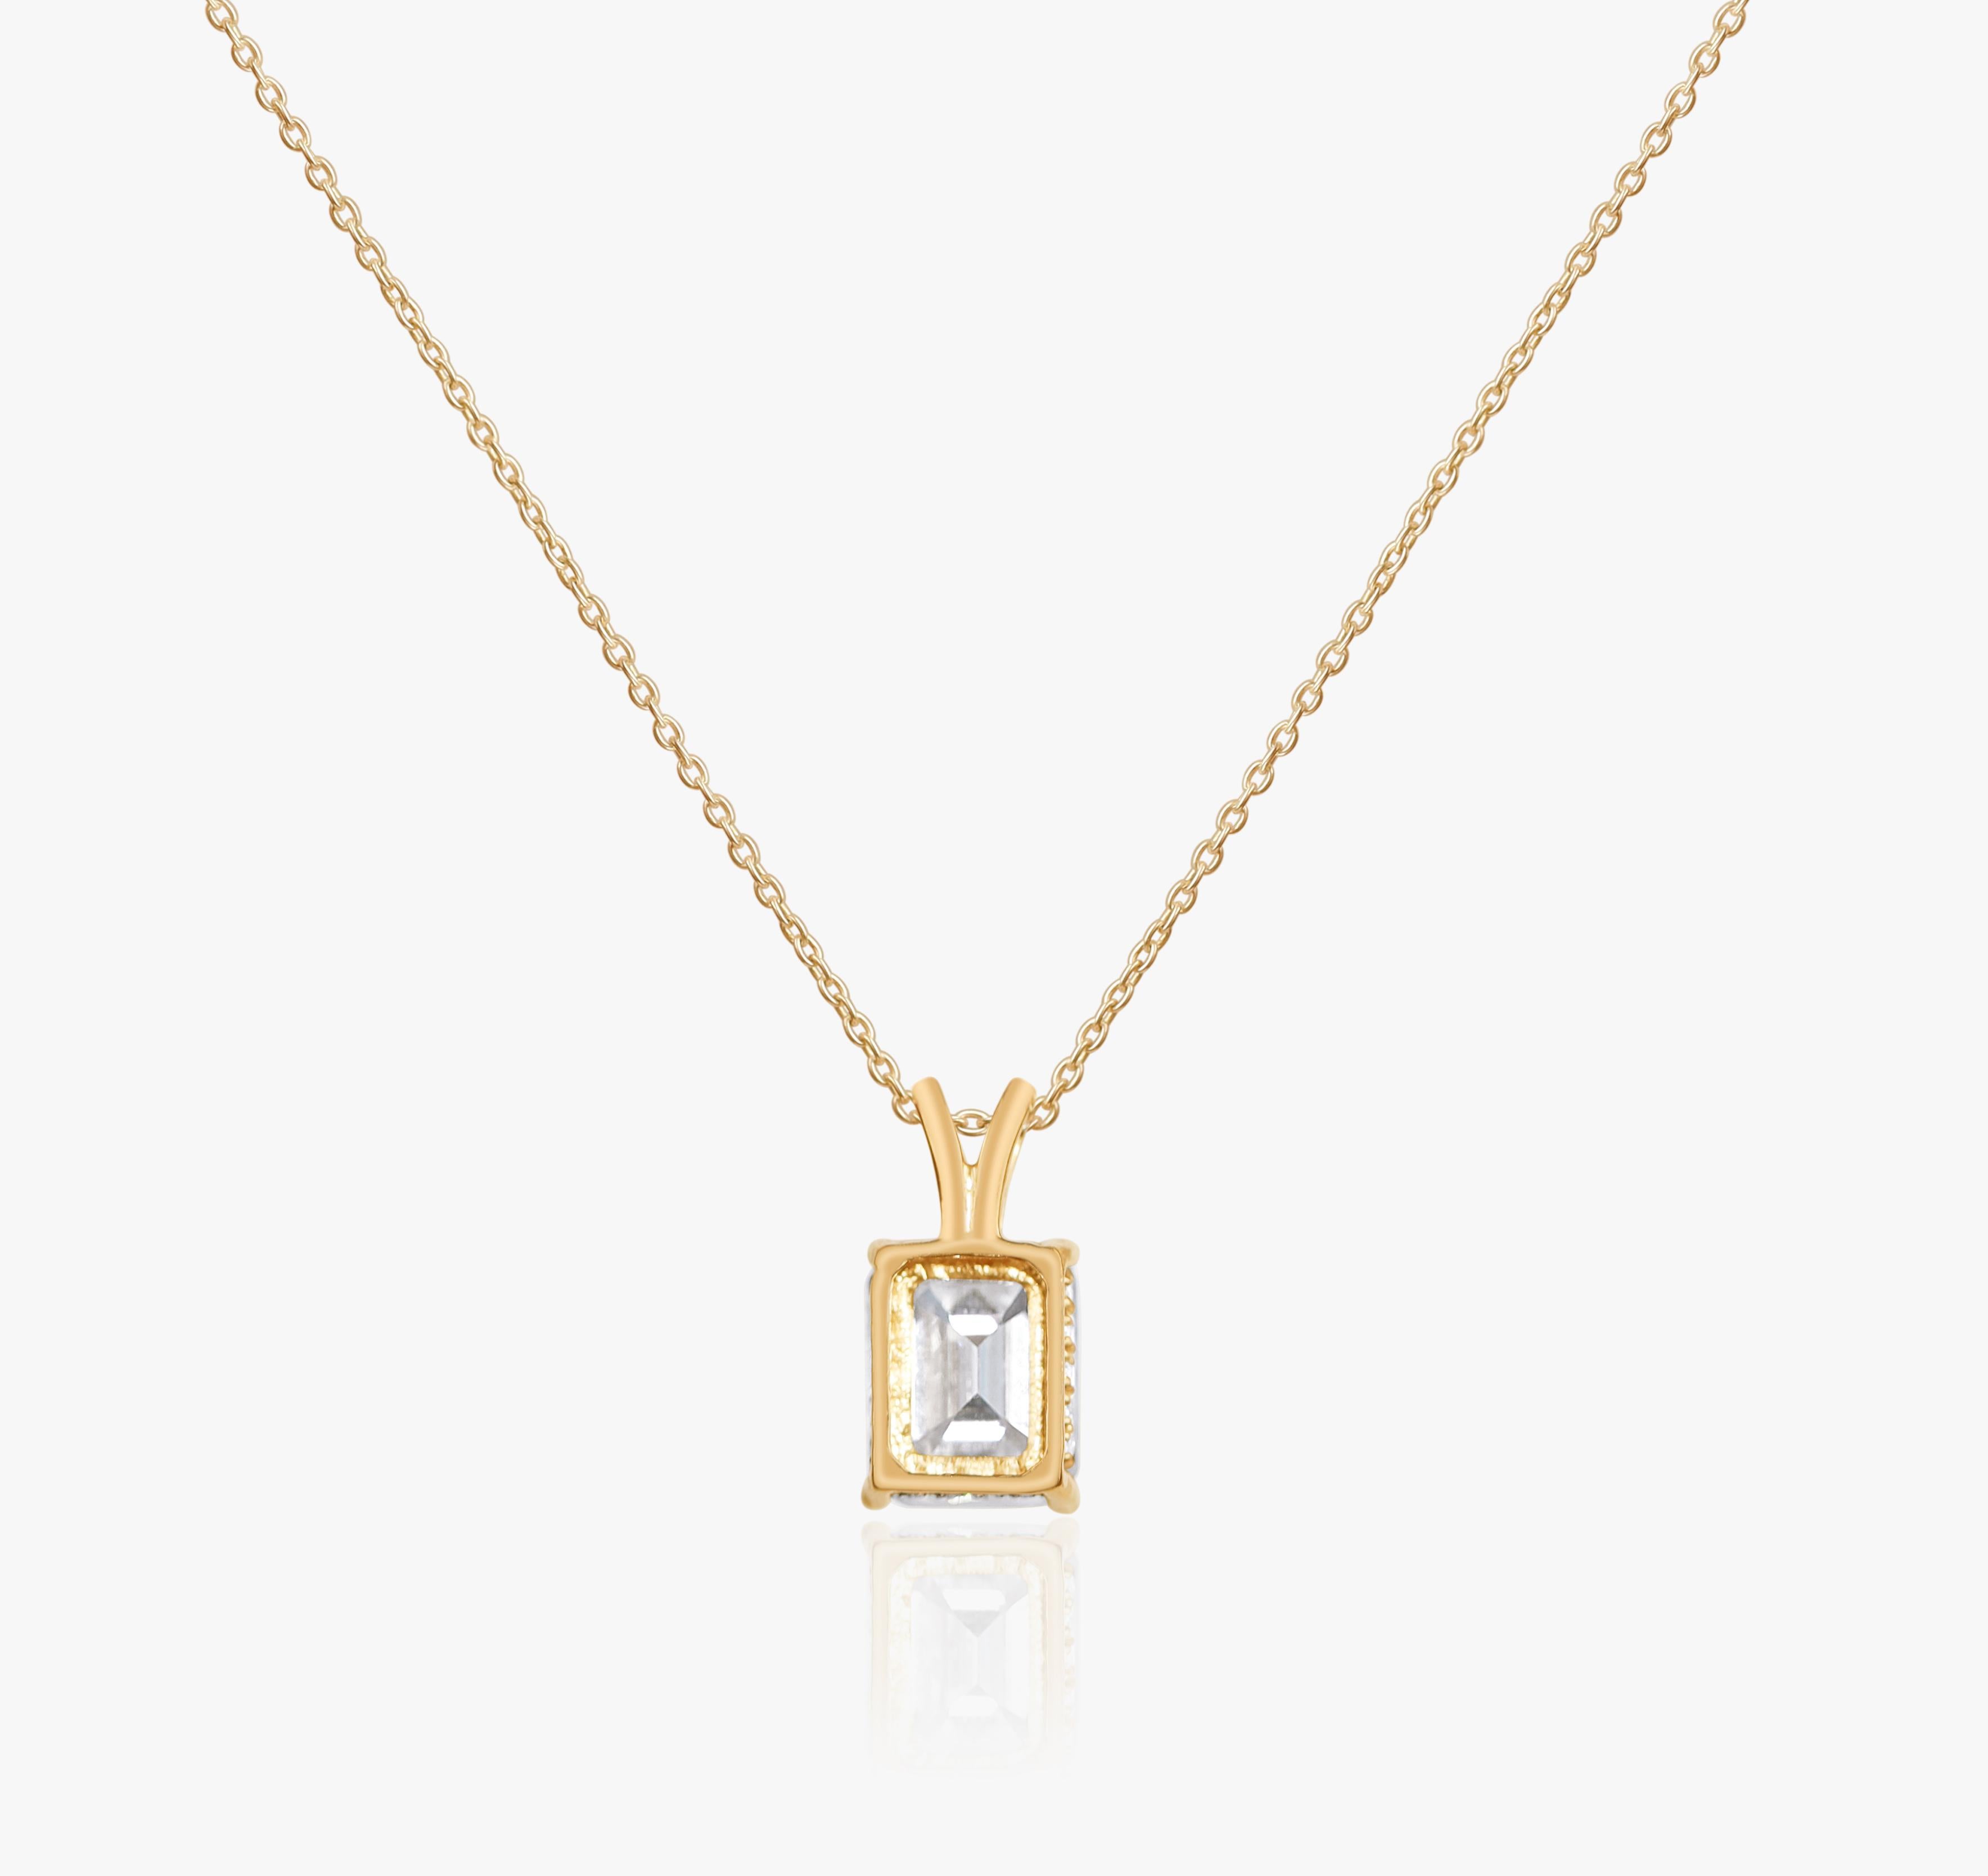 GIA Report Certified 4 Carat Emerald Cut Diamond 18k Yellow Gold Pendant for her

Available in 18k Yellow gold.

Same design can be made also with other custom gemstones per request.

Product details:

- Solid gold

- Main stone - approx. 4 carat